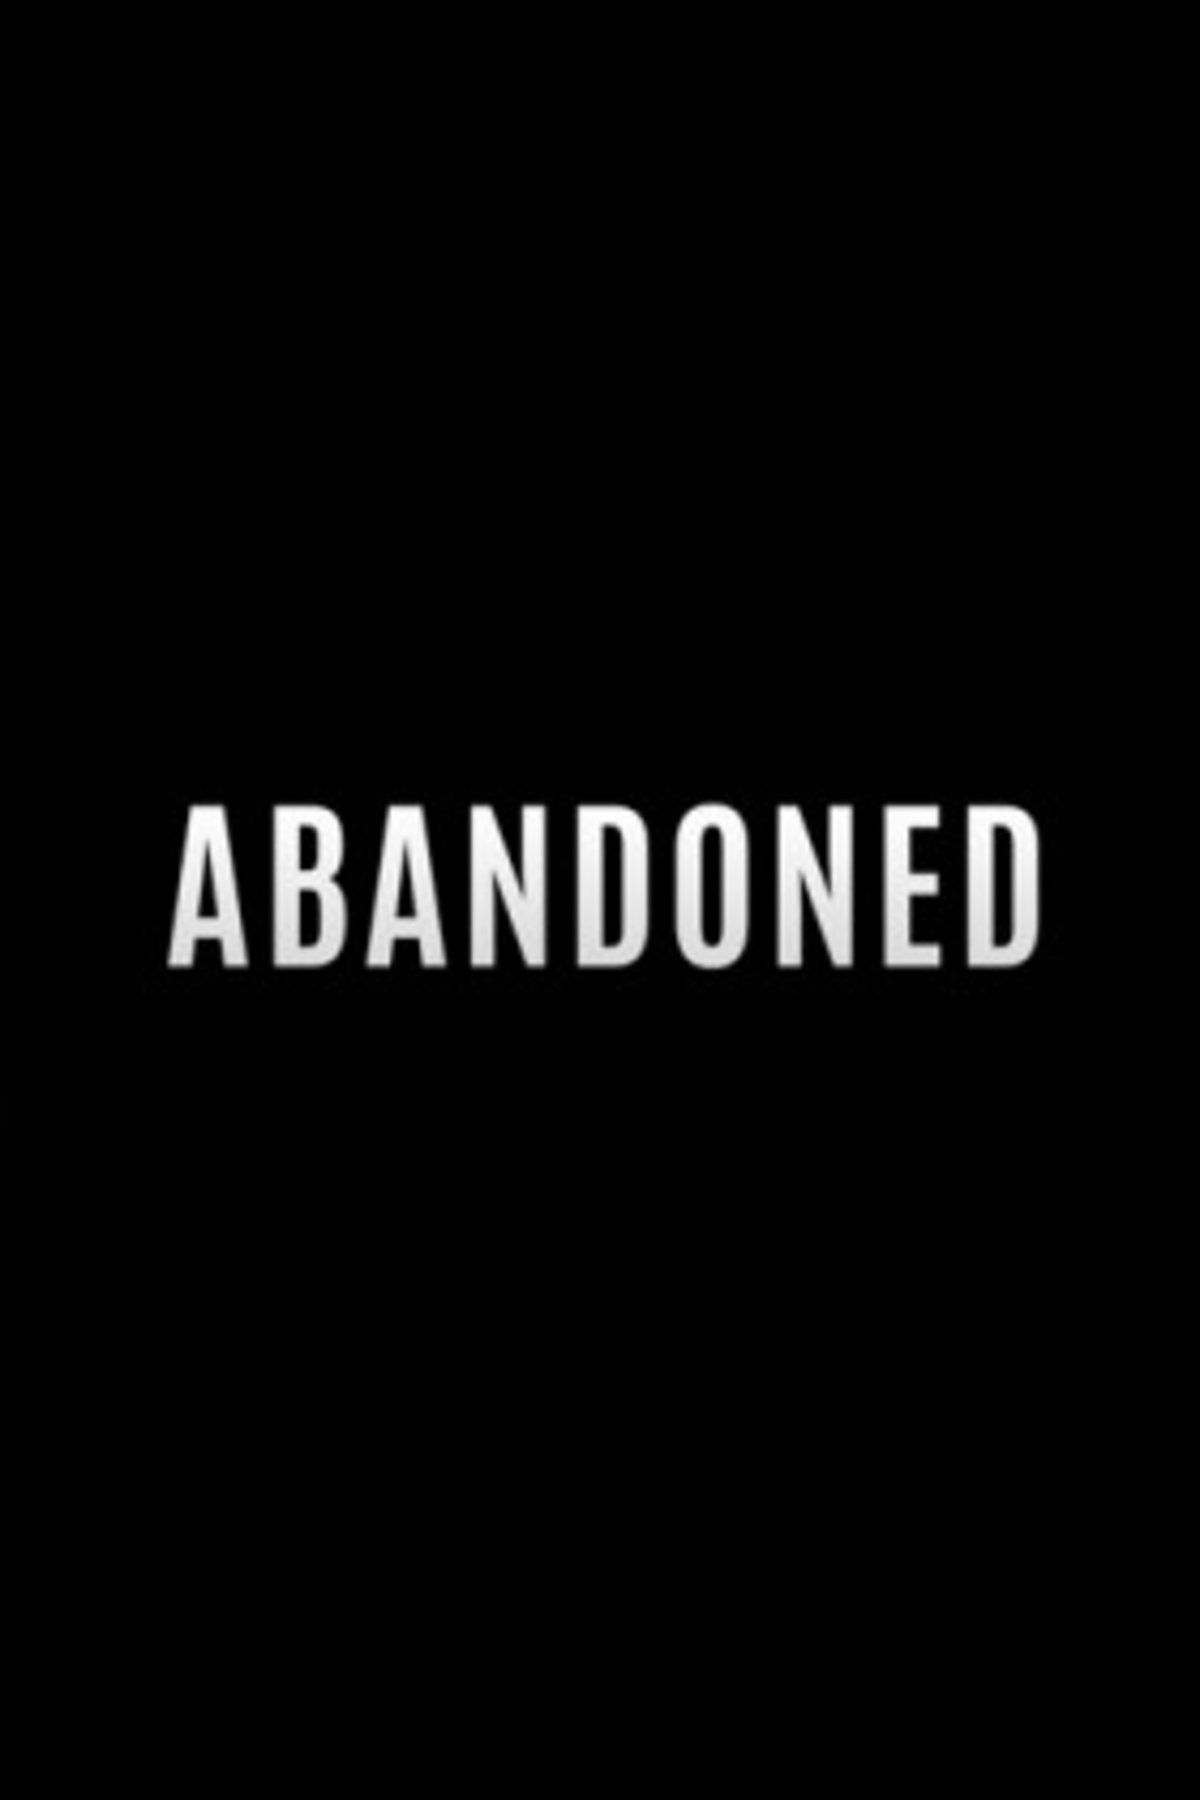 The director of Abandoned assures that it is not exactly a horror game